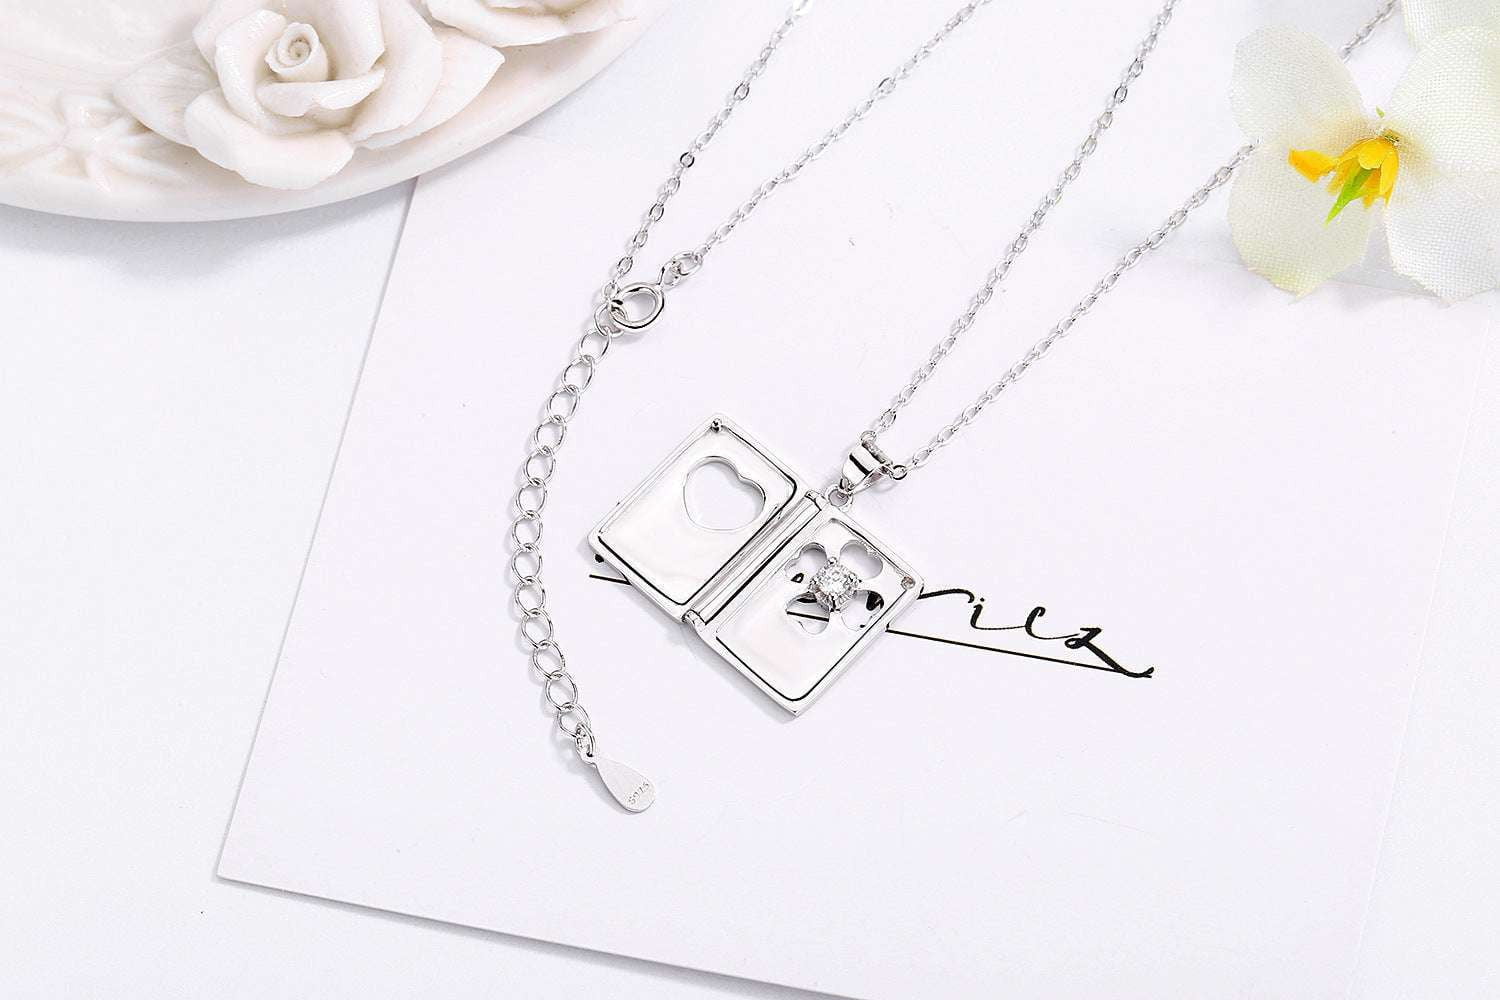 Creative Love Letter Necklace, Silver Necklace, Small Love Letter Jewelry - available at Sparq Mart